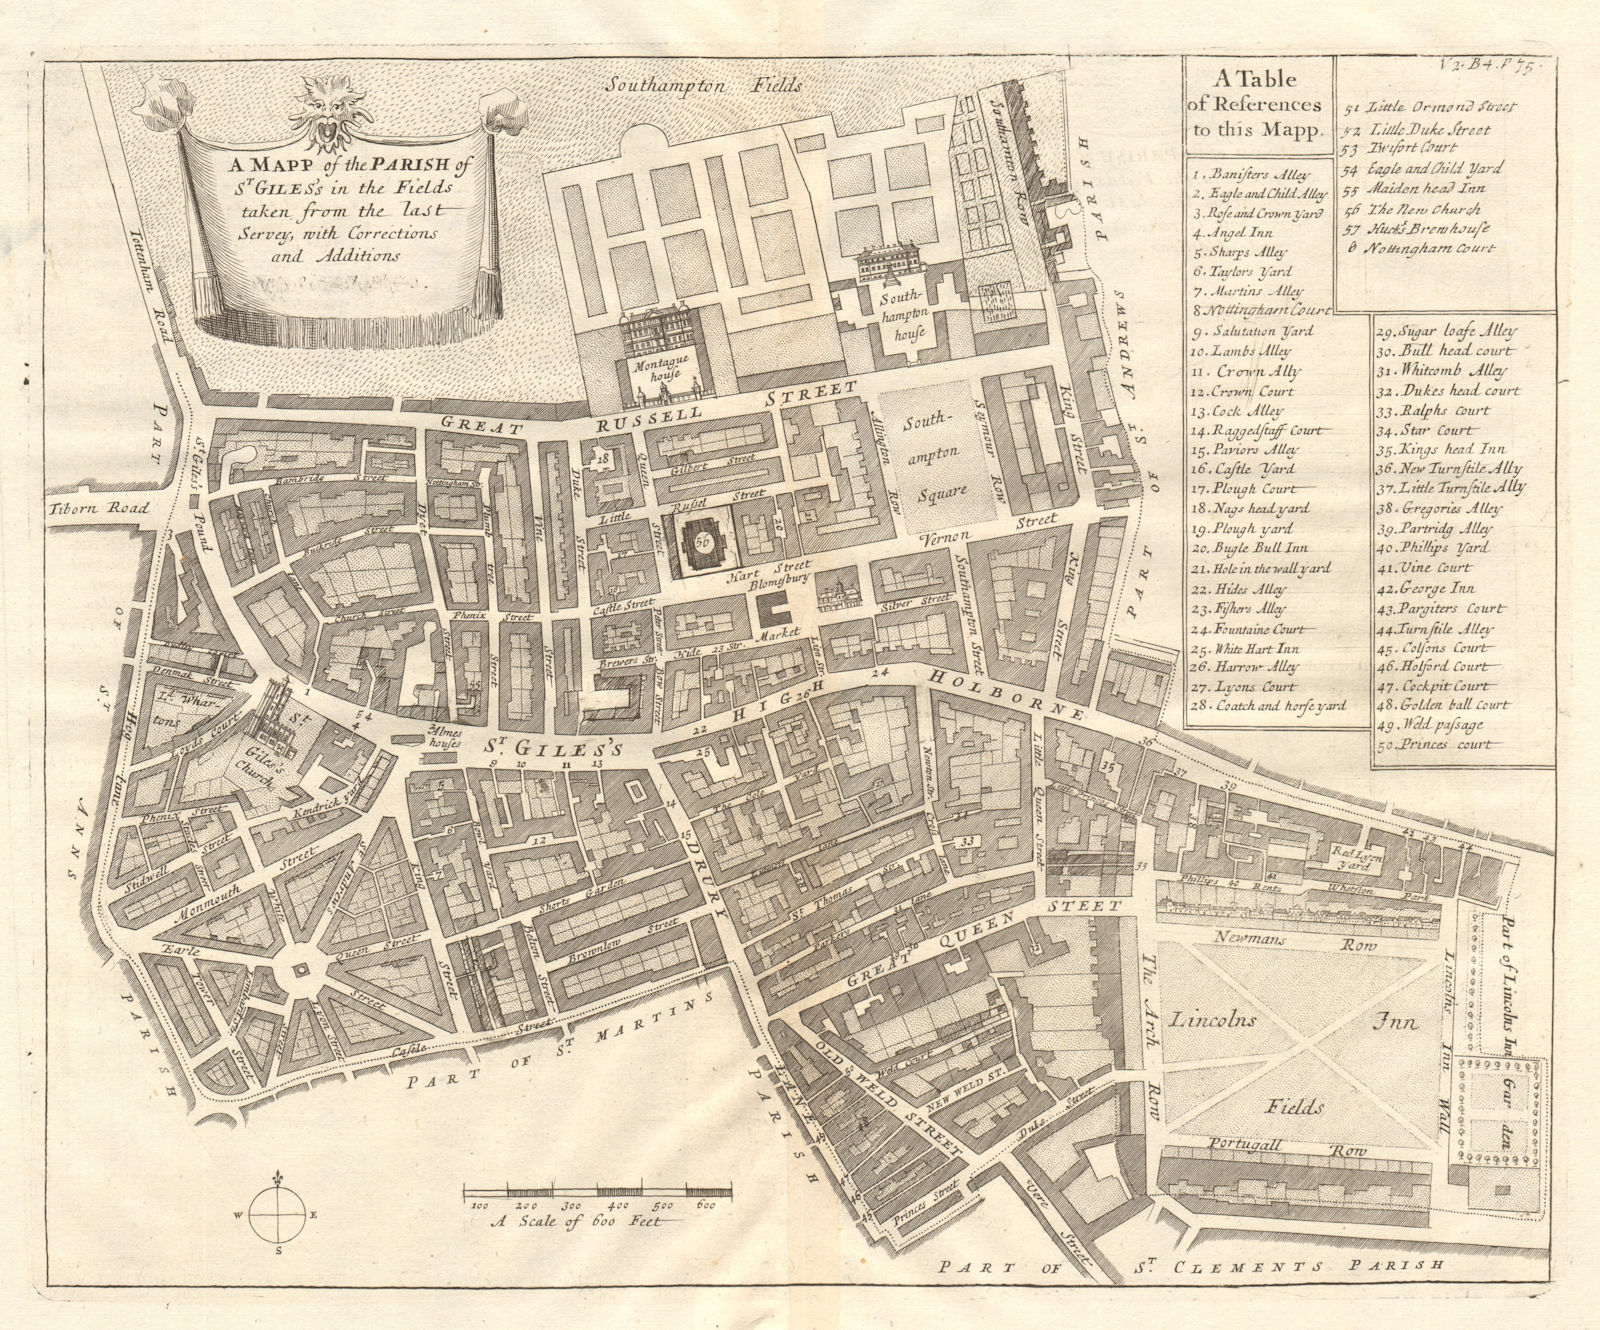 'St Giles's in the Fields' parish. Bloomsbury. Seven Dials. STOW/STRYPE 1720 map